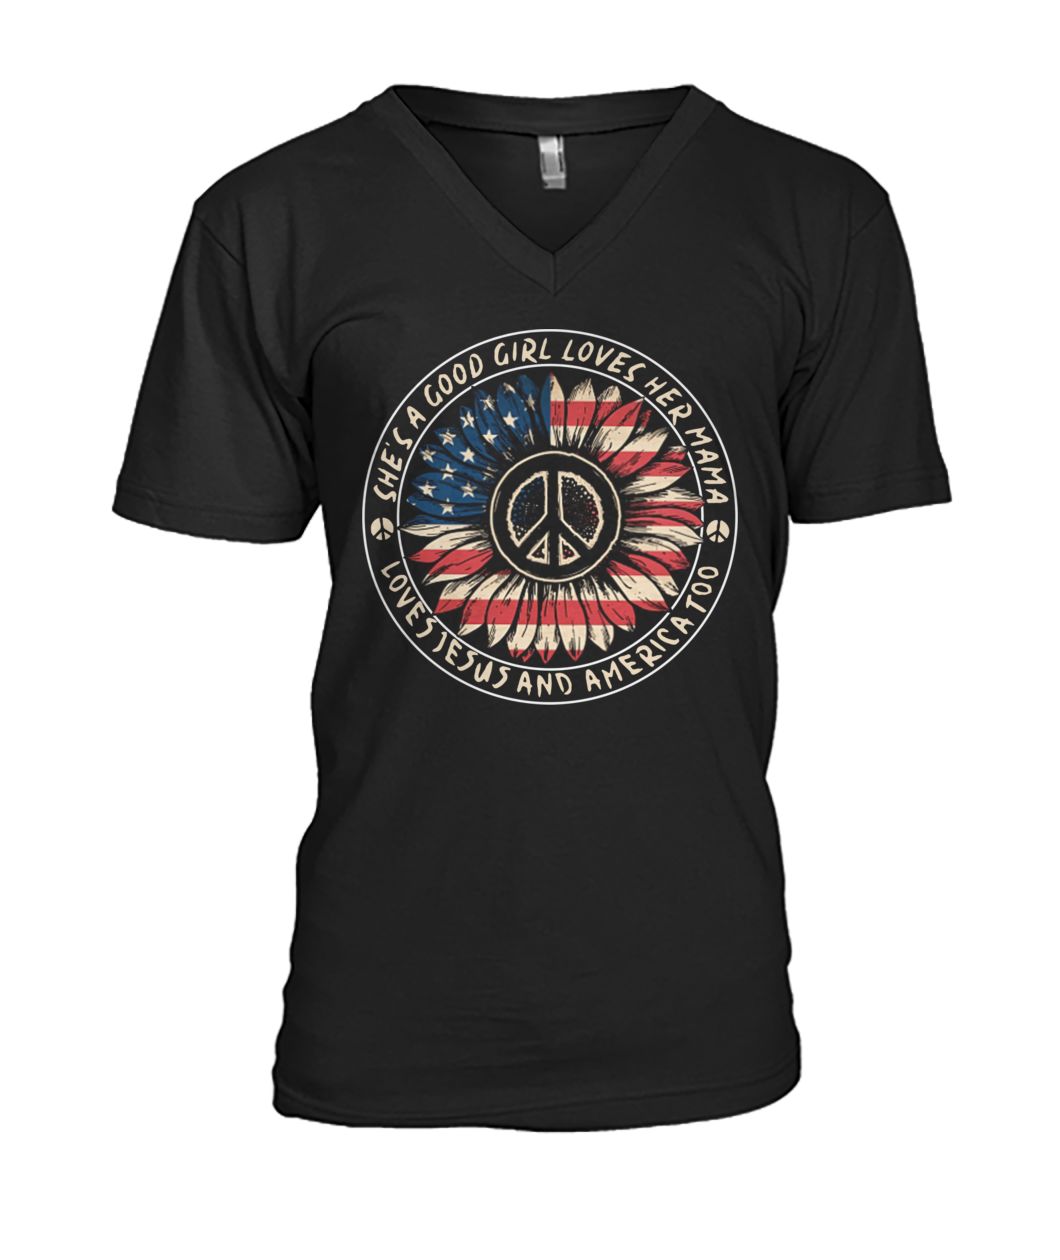 She’s a good girl loves her mama love jesus and america too america flag 4th of july mens v-neck